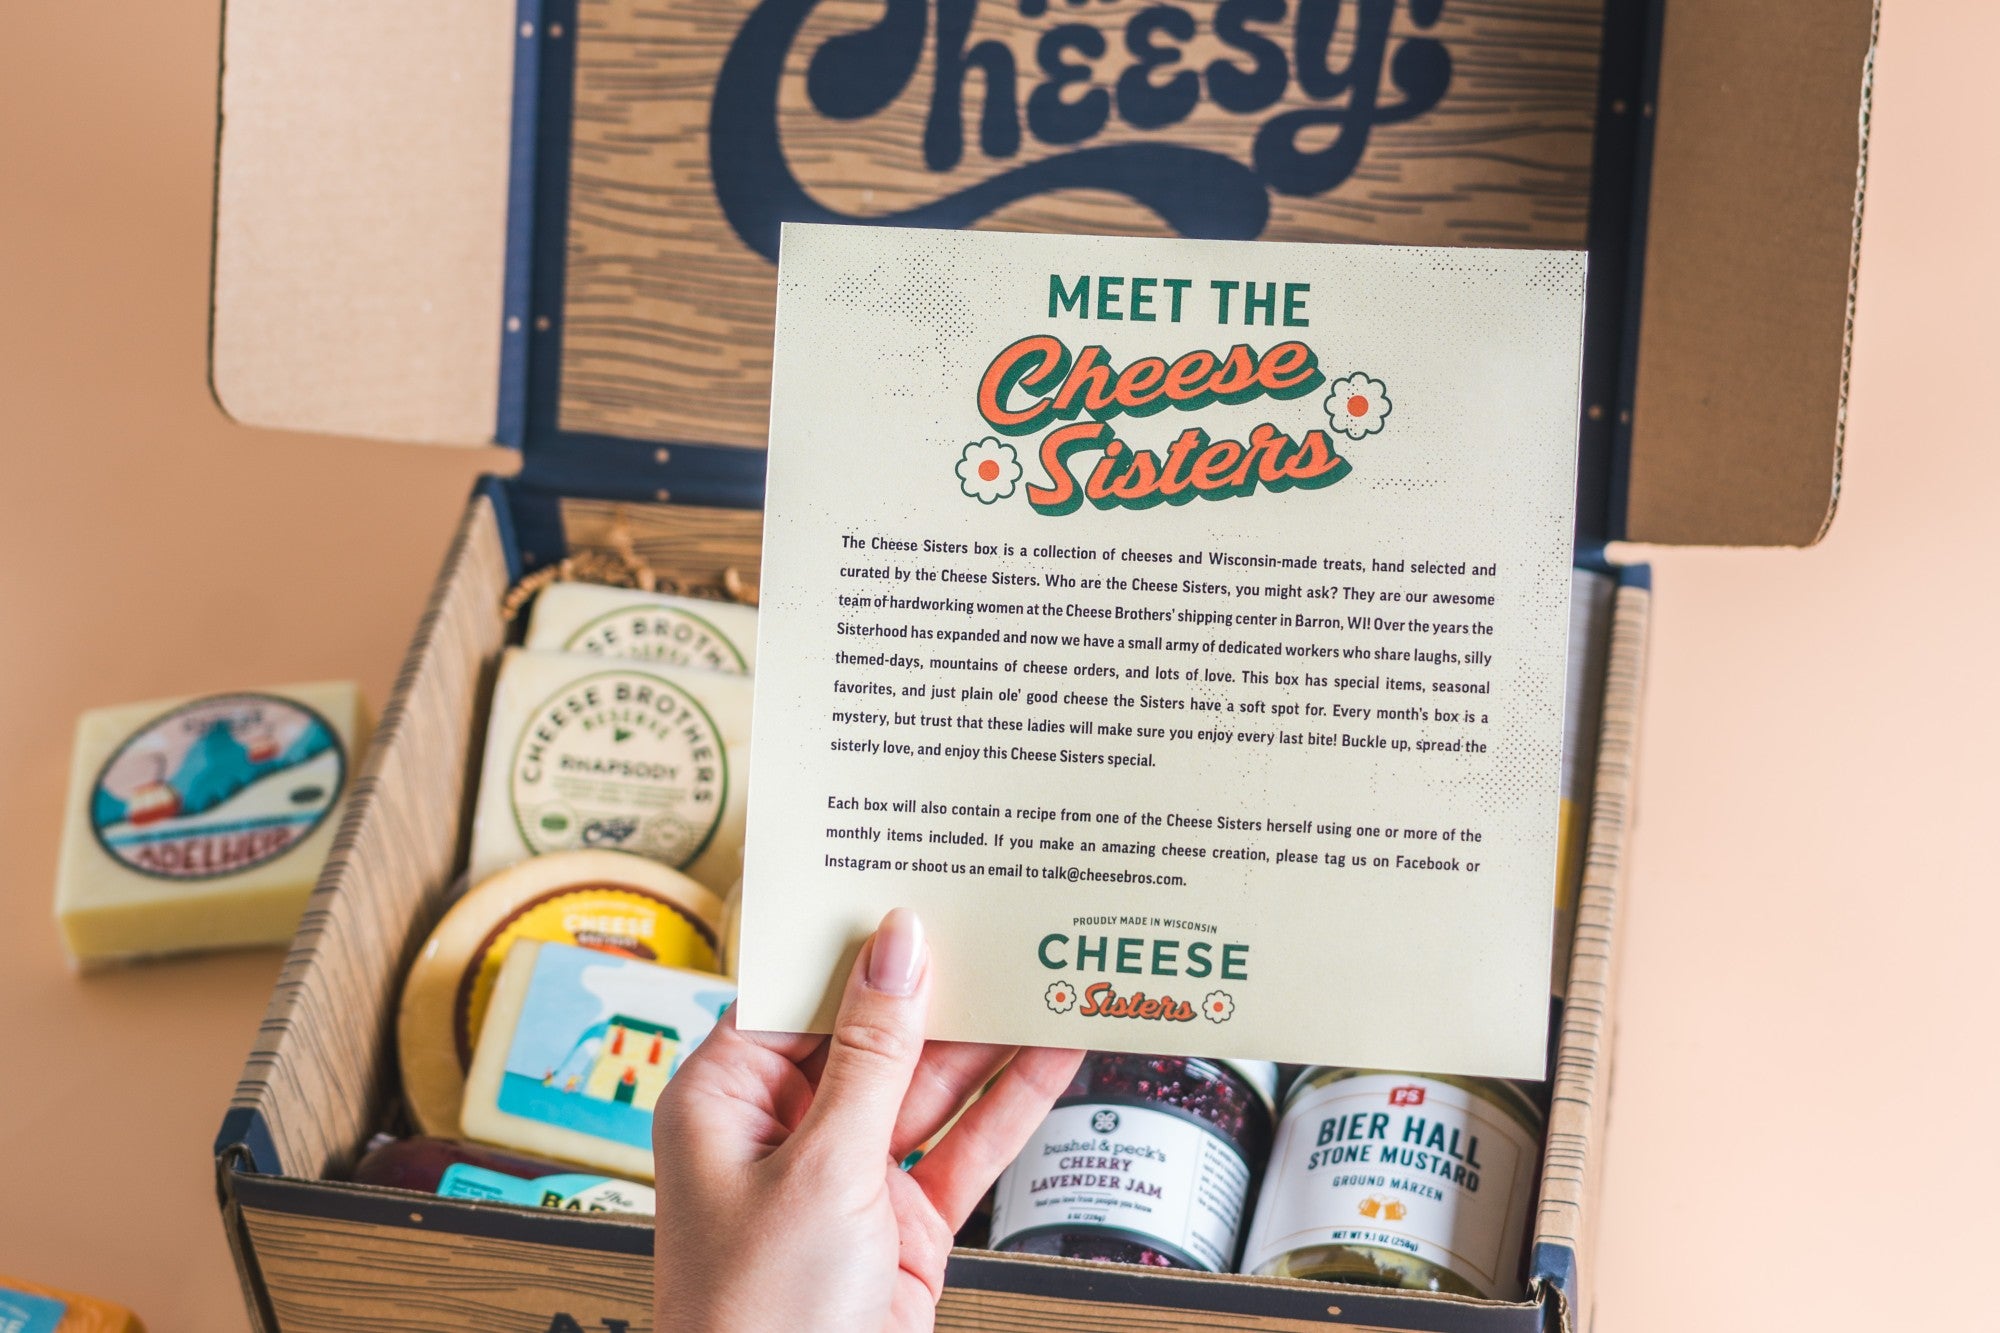 Cheese Sisters box with Meet the Cheese Sisters letter. 